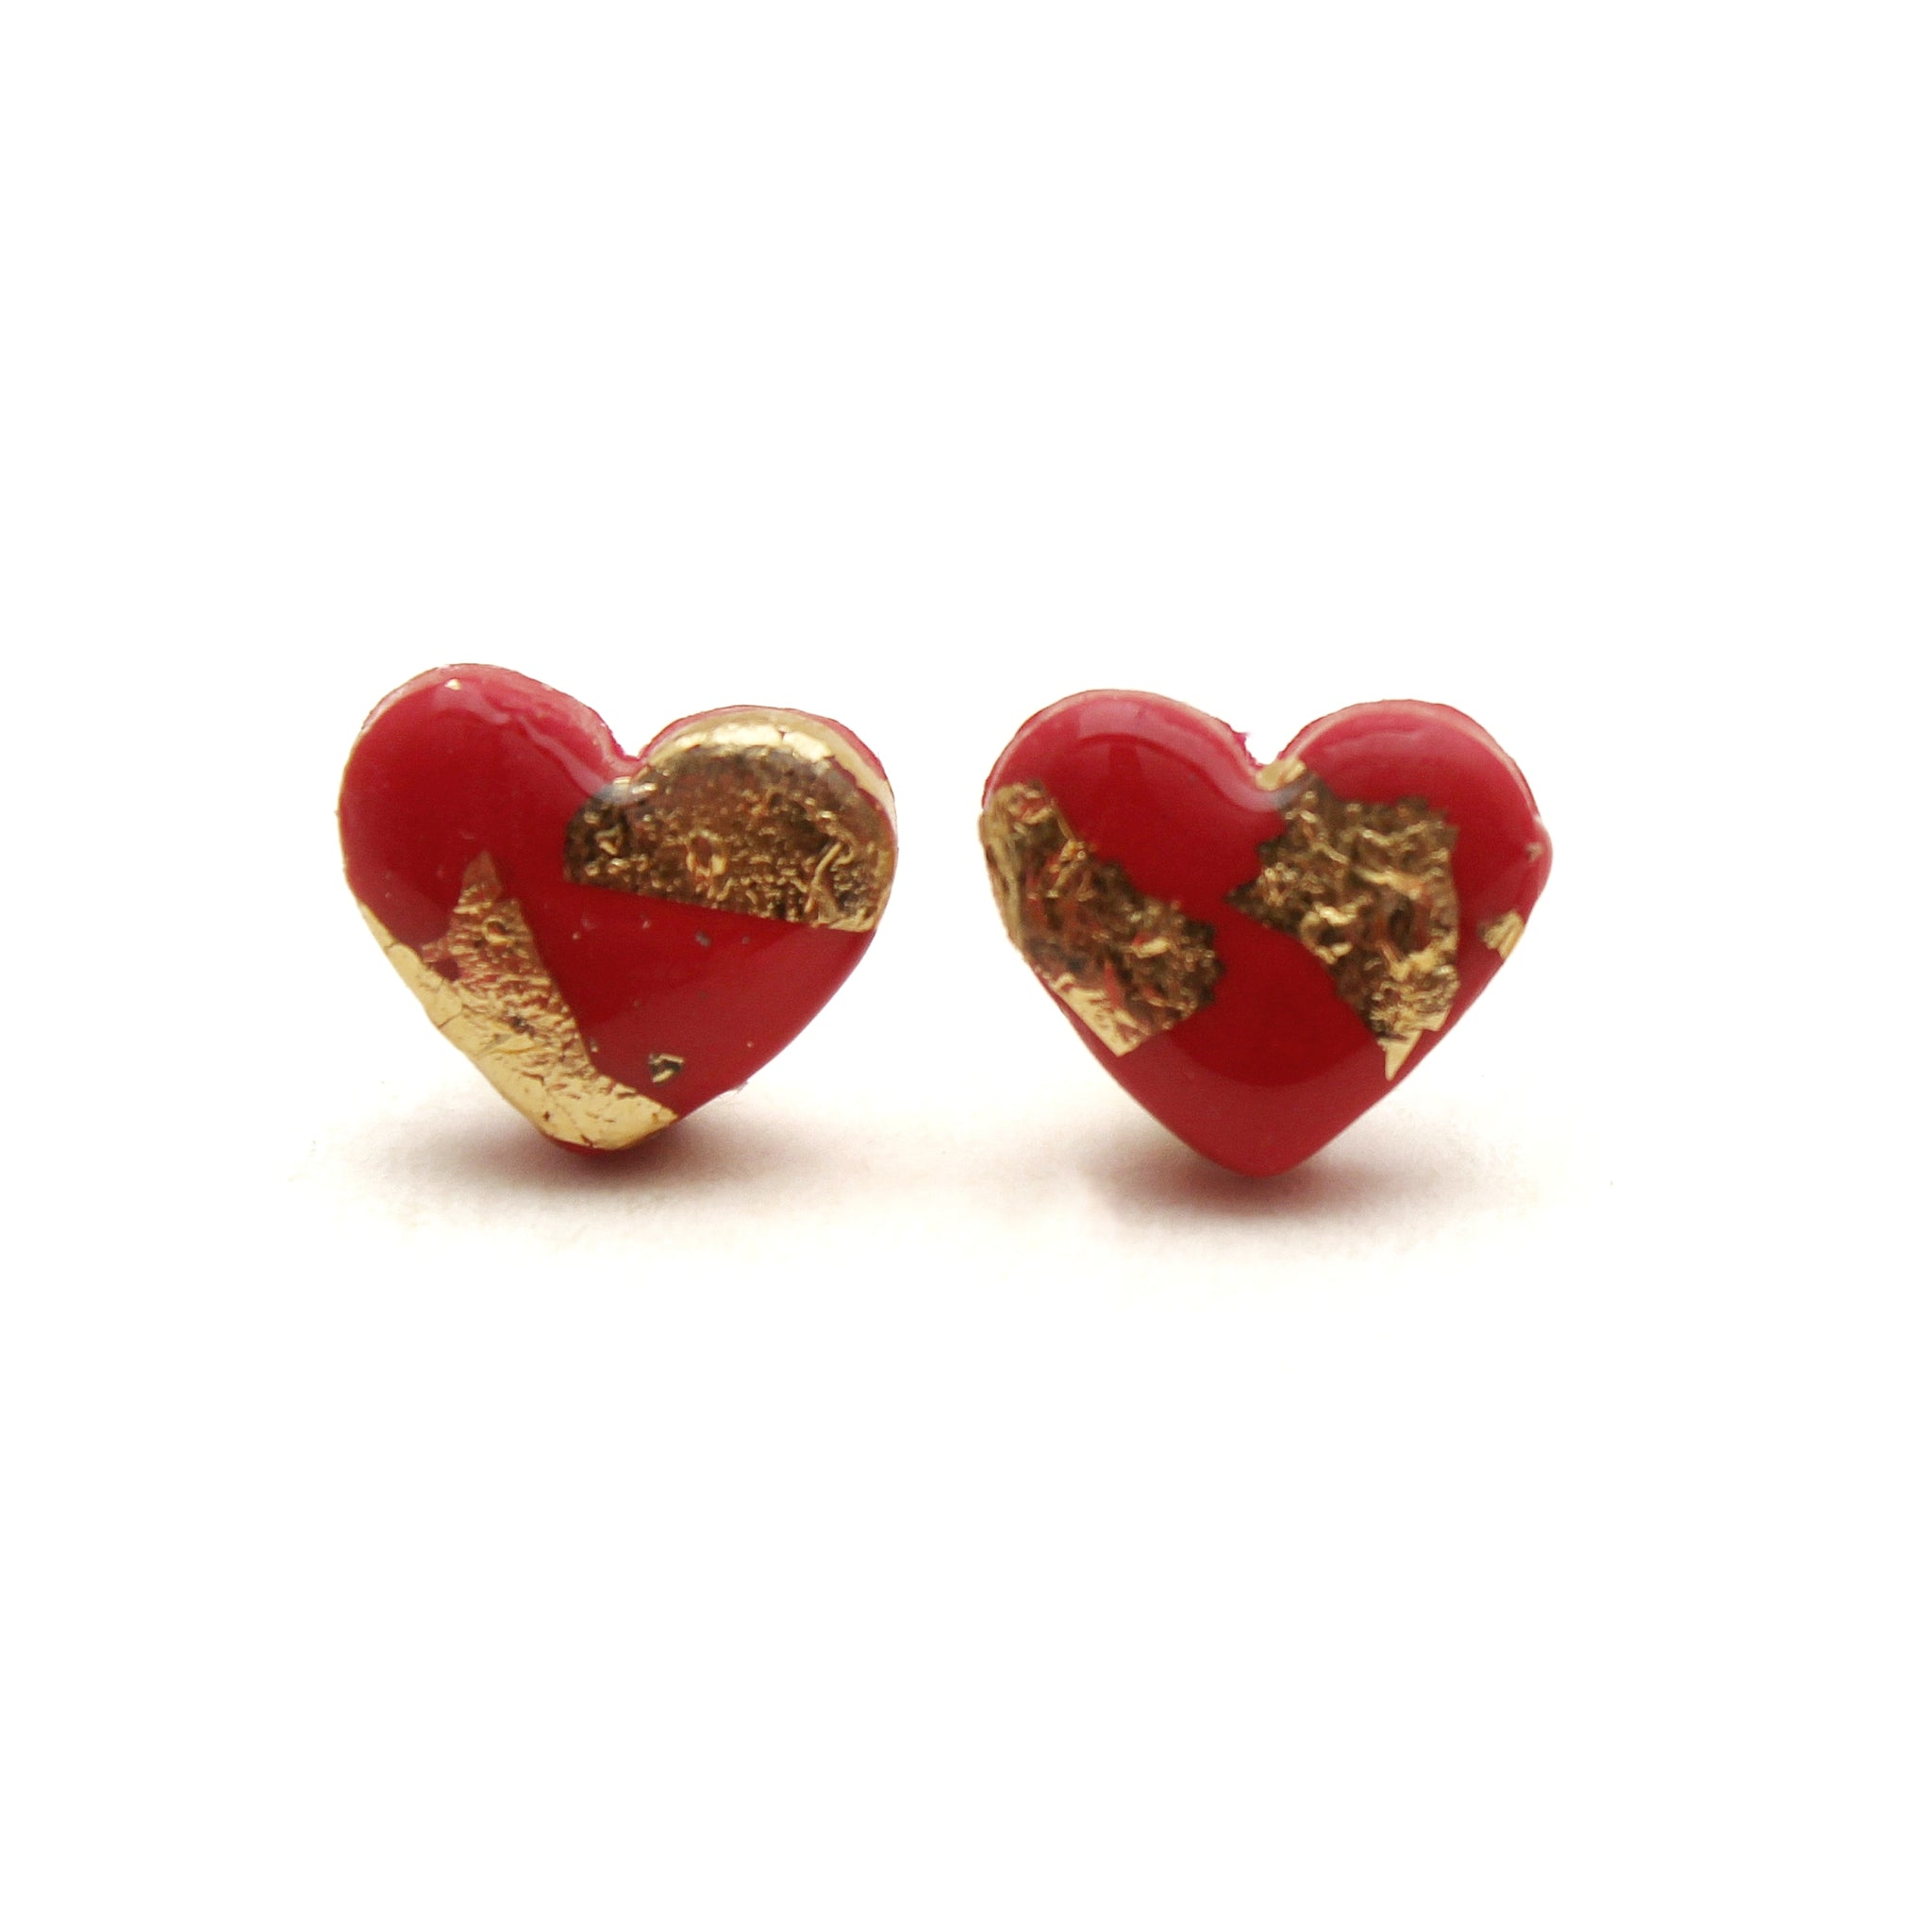 Red and Gold Heart Stud Earrings - Valentine's